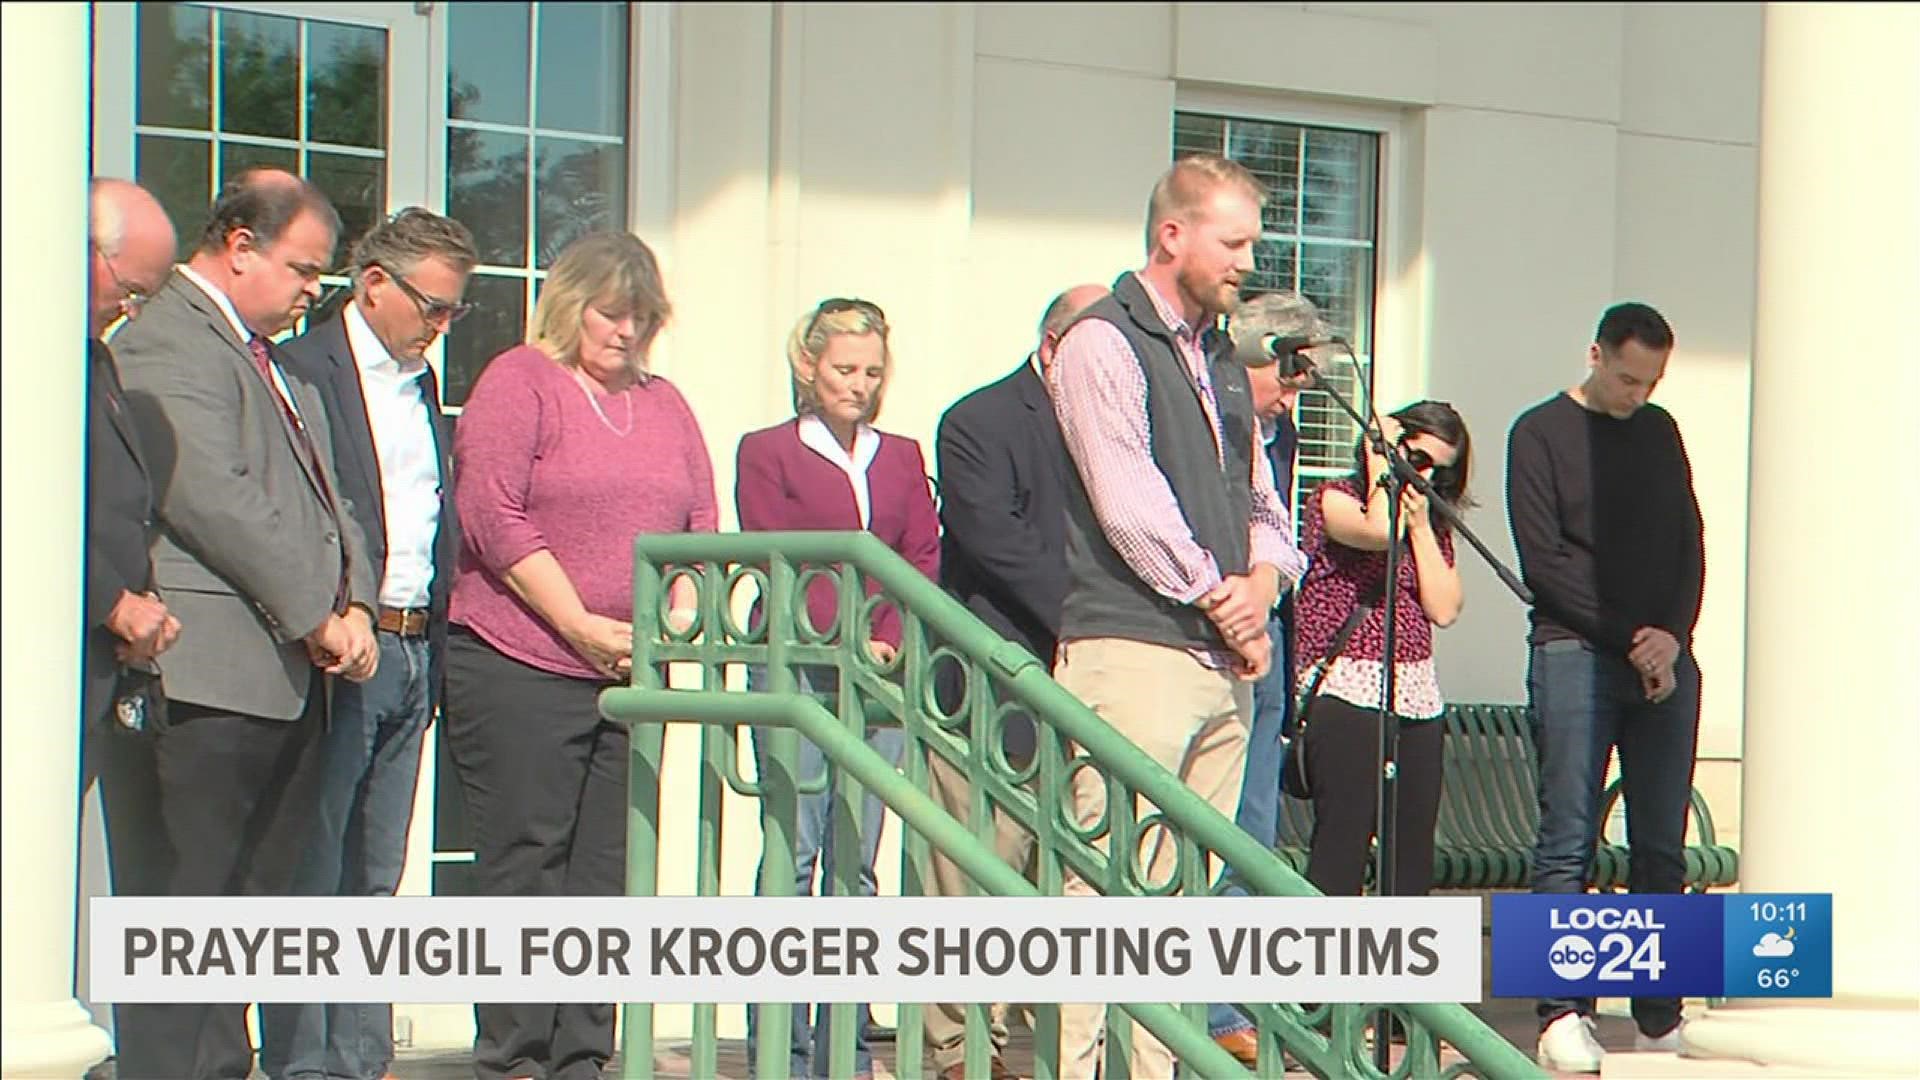 Officials confirm 15 residents were injured in the Kroger shooting at least one person has died from their injures.